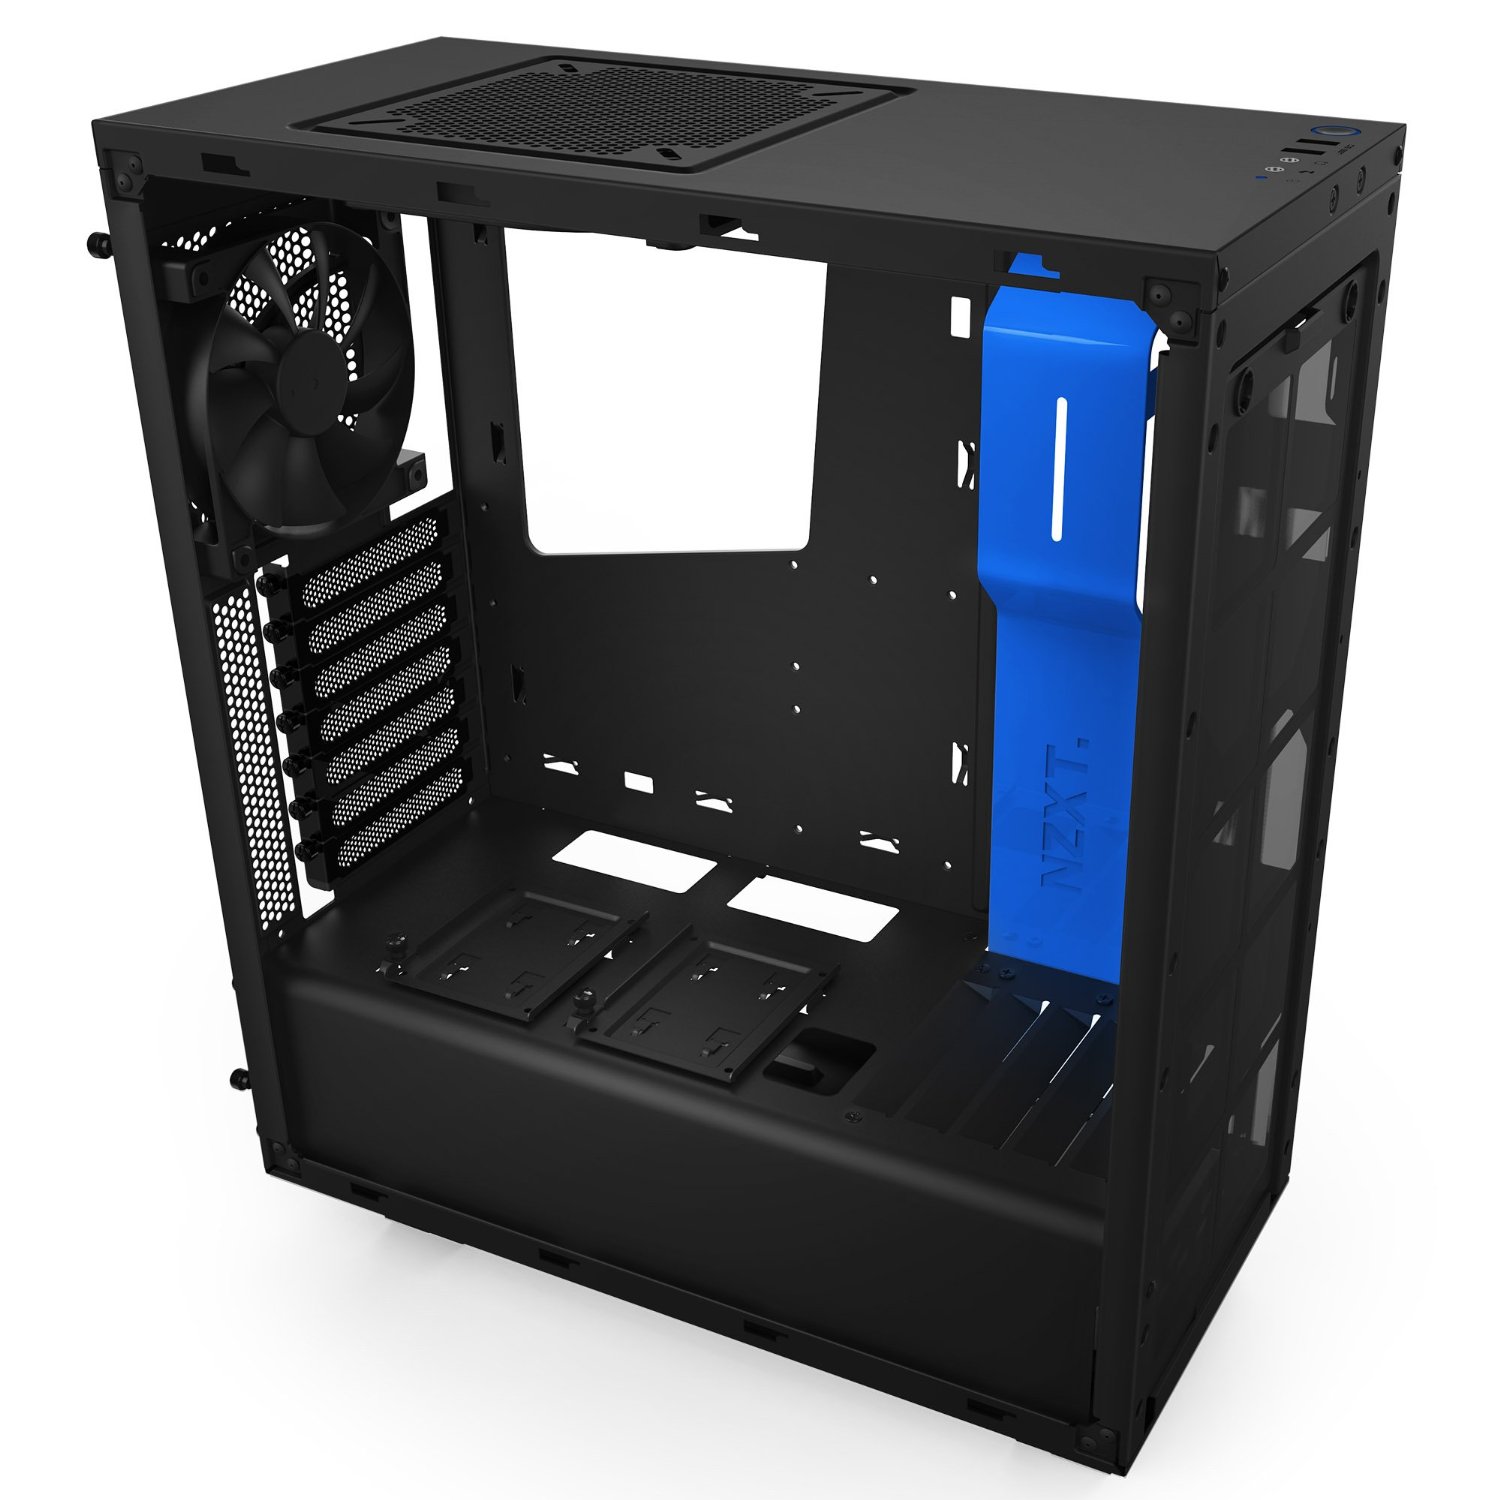 The best ATX midtower PC cases PC Gamer